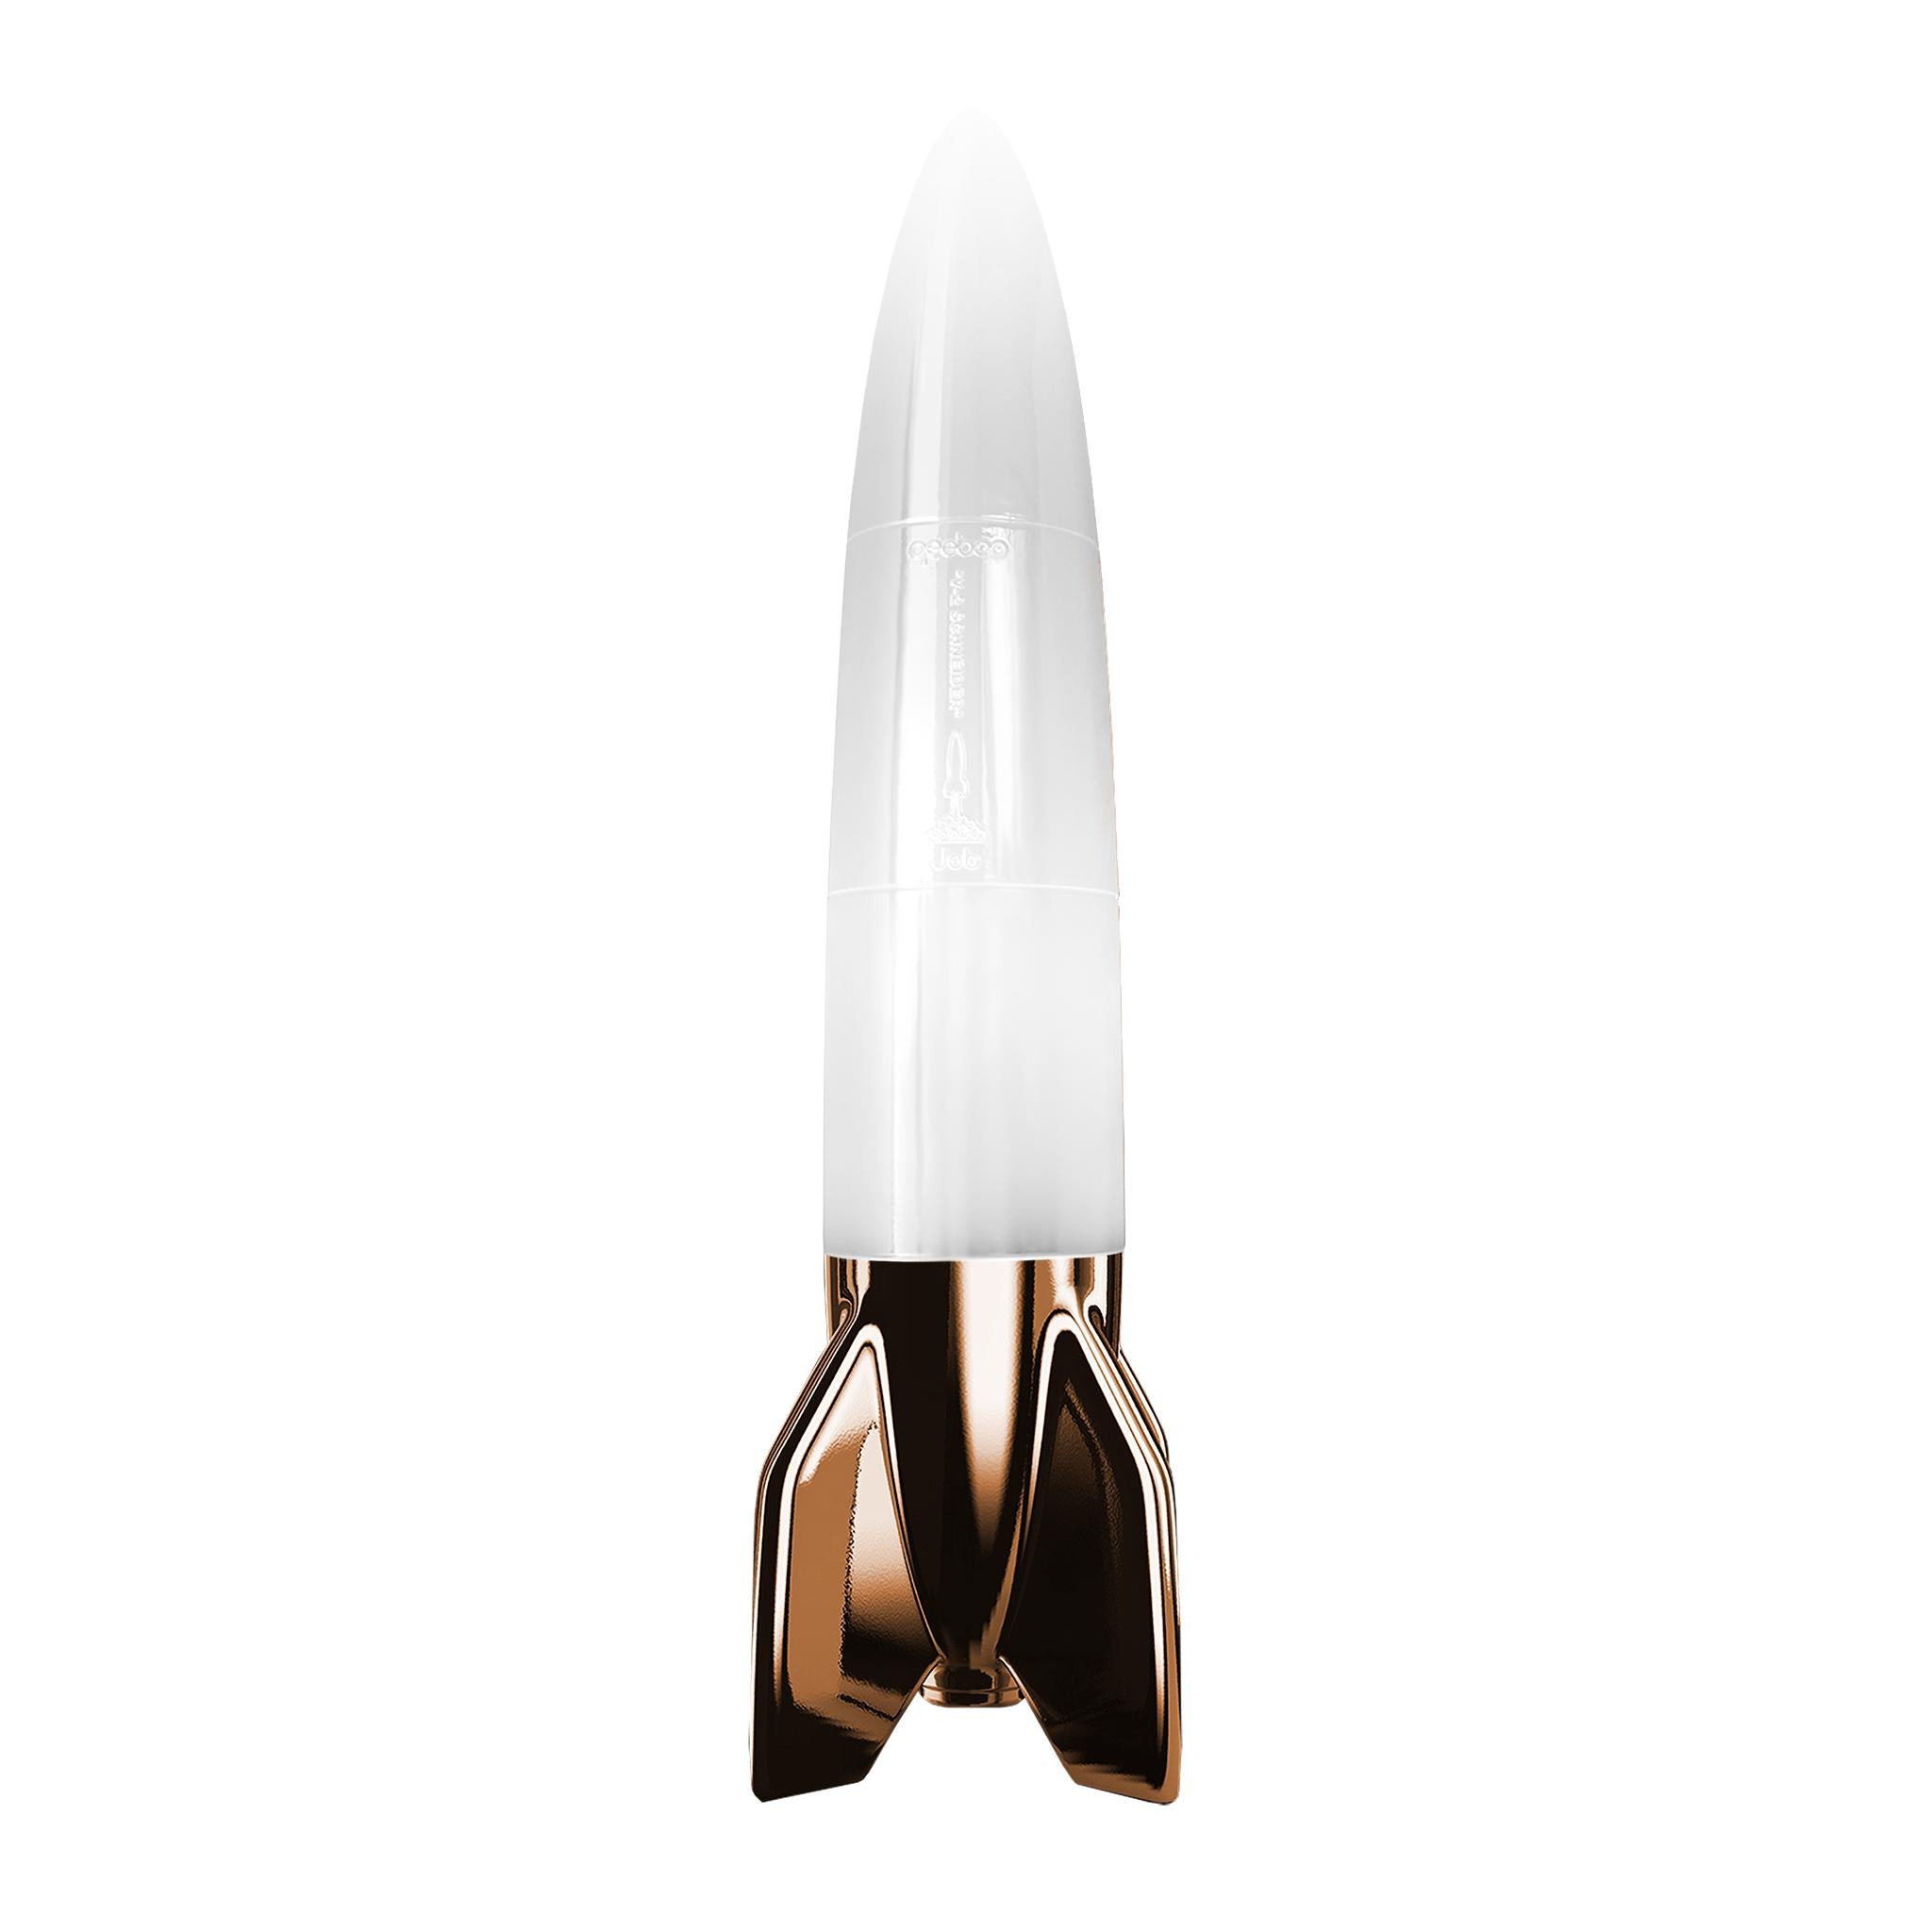 For Sale: Pink (Copper-White) Modern World War II Rocket Gold Silver or Copper Table Lamp By Studio Job